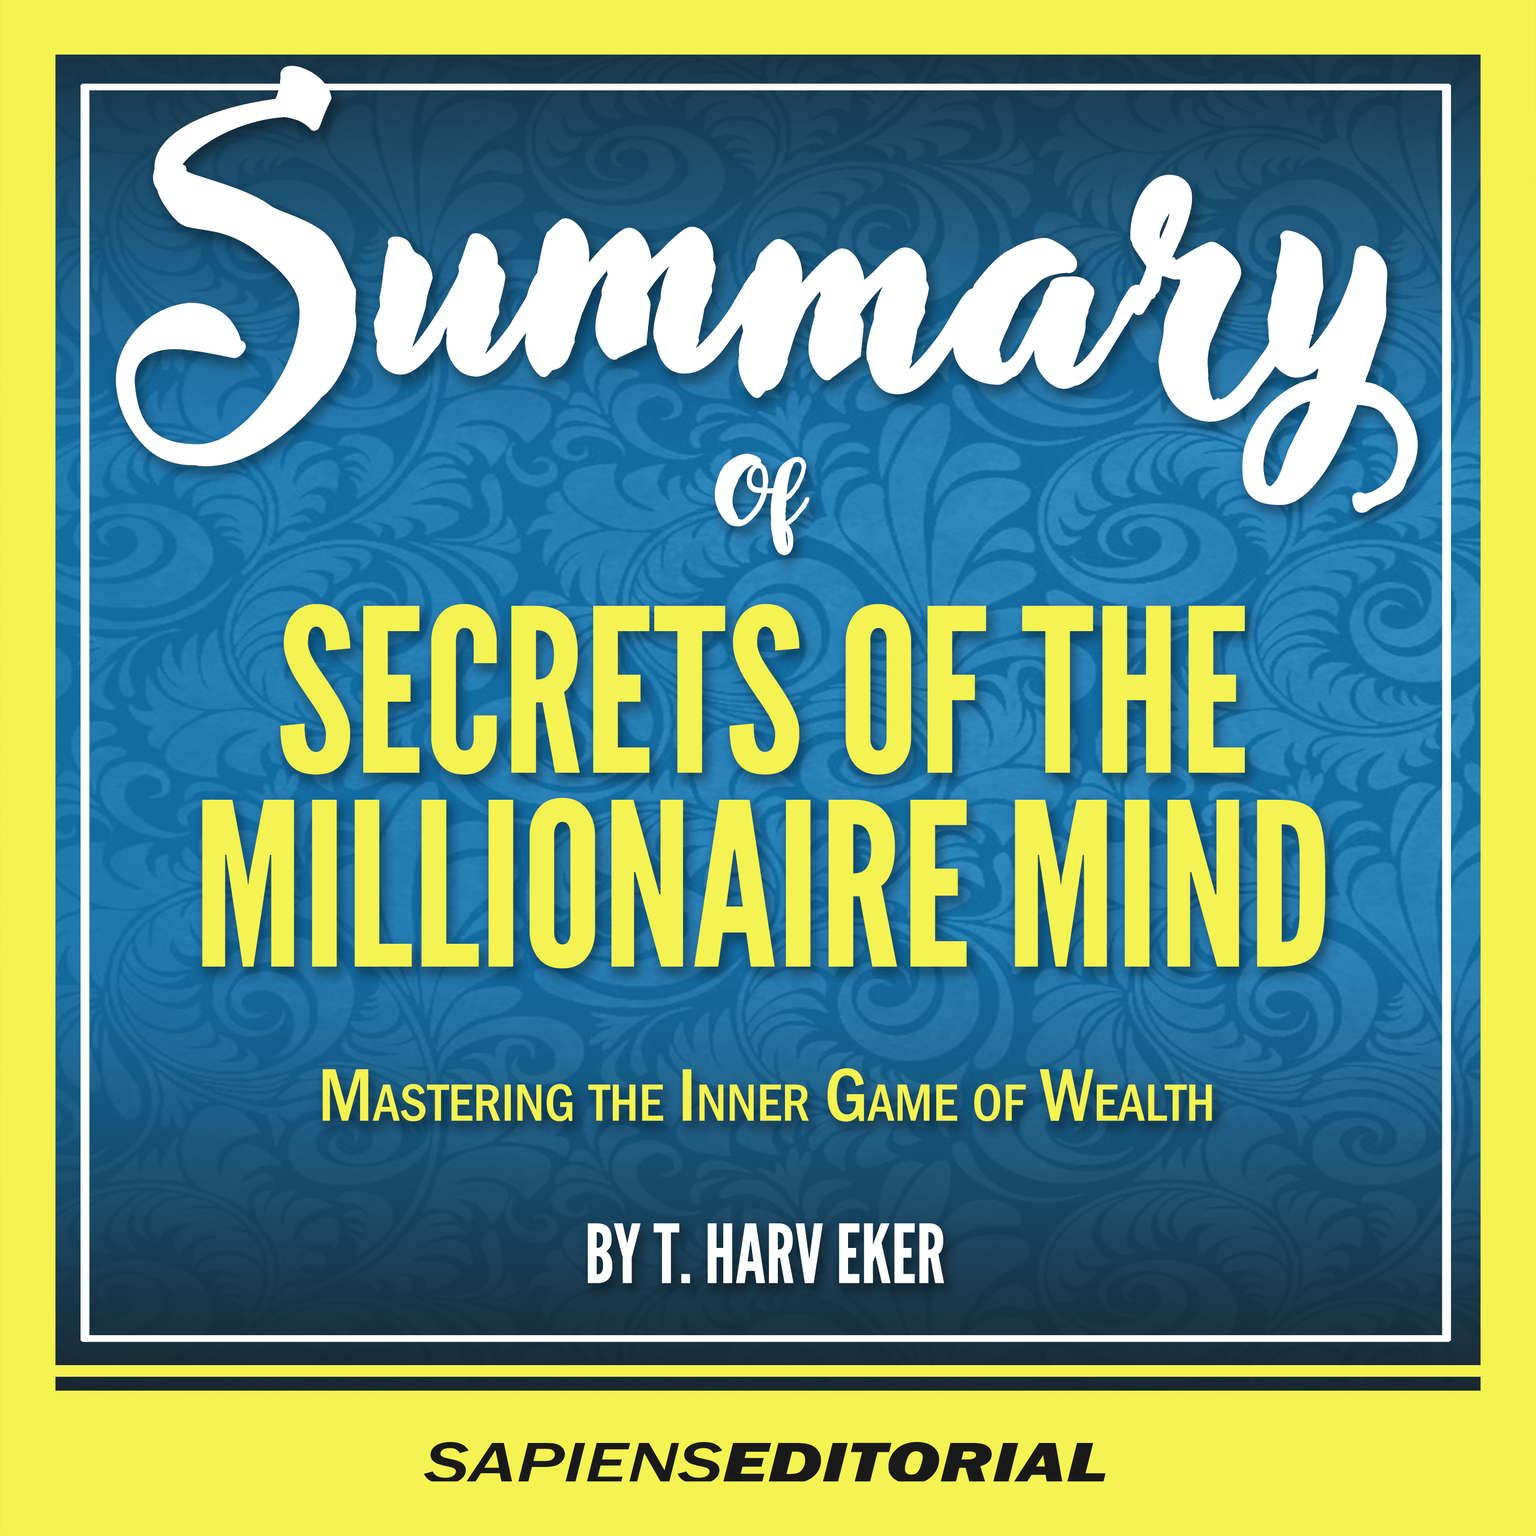 Summary Of “Secrets Of The Millionaire Mind: Mastering The Inner Game Of Wealth - By T. Harv Eker” Audiobook, by Sapiens Editorial